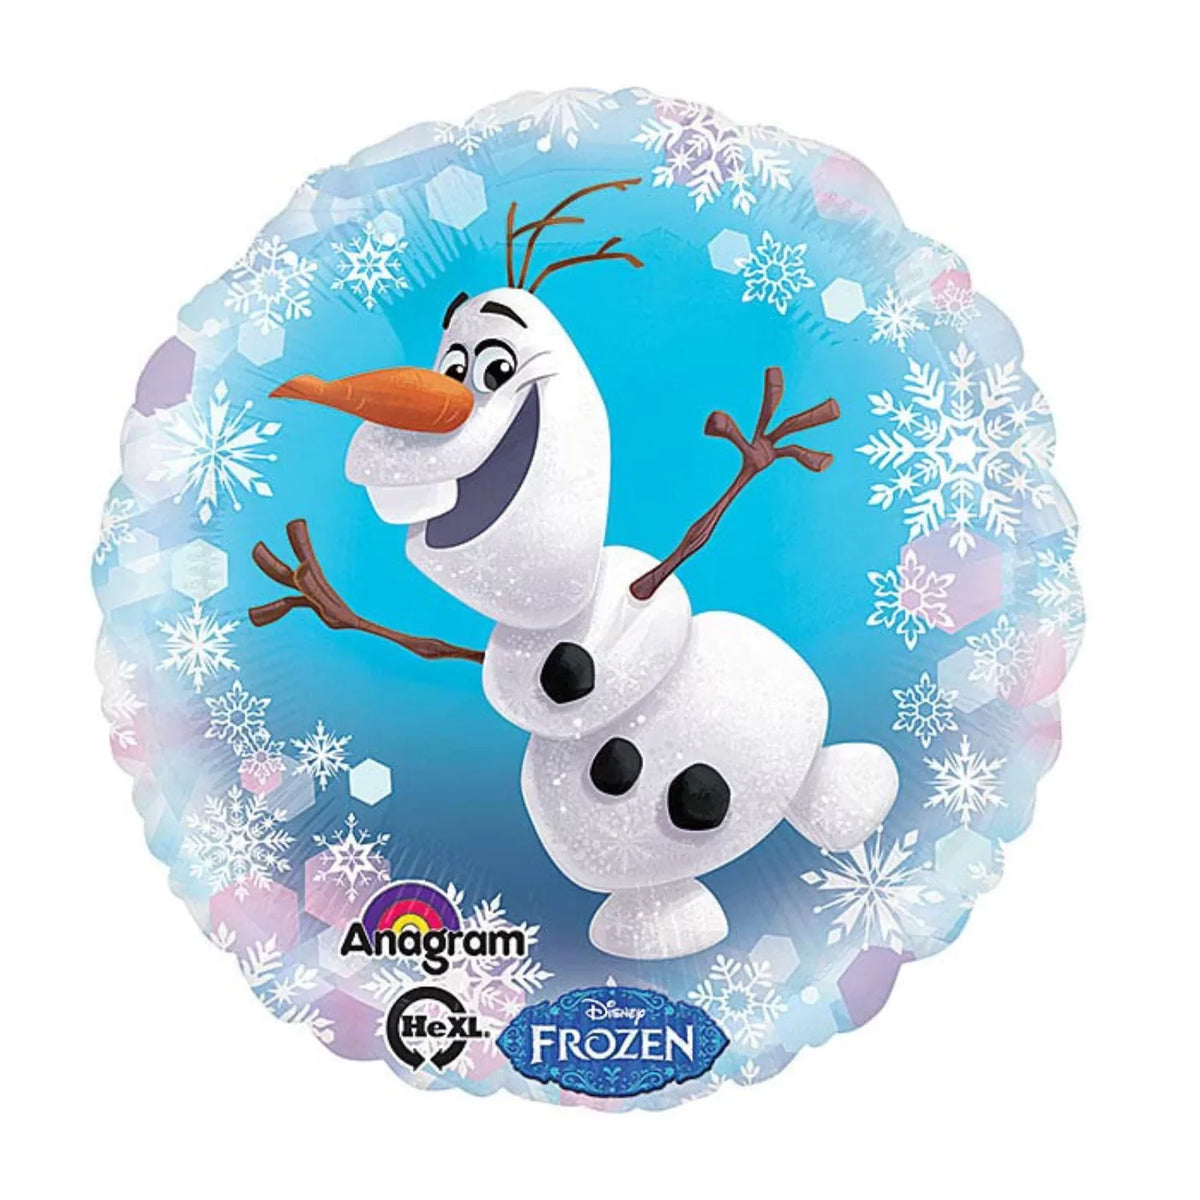 17 inch Disney's Frozen Olaf Movie Character Foil Balloon 3